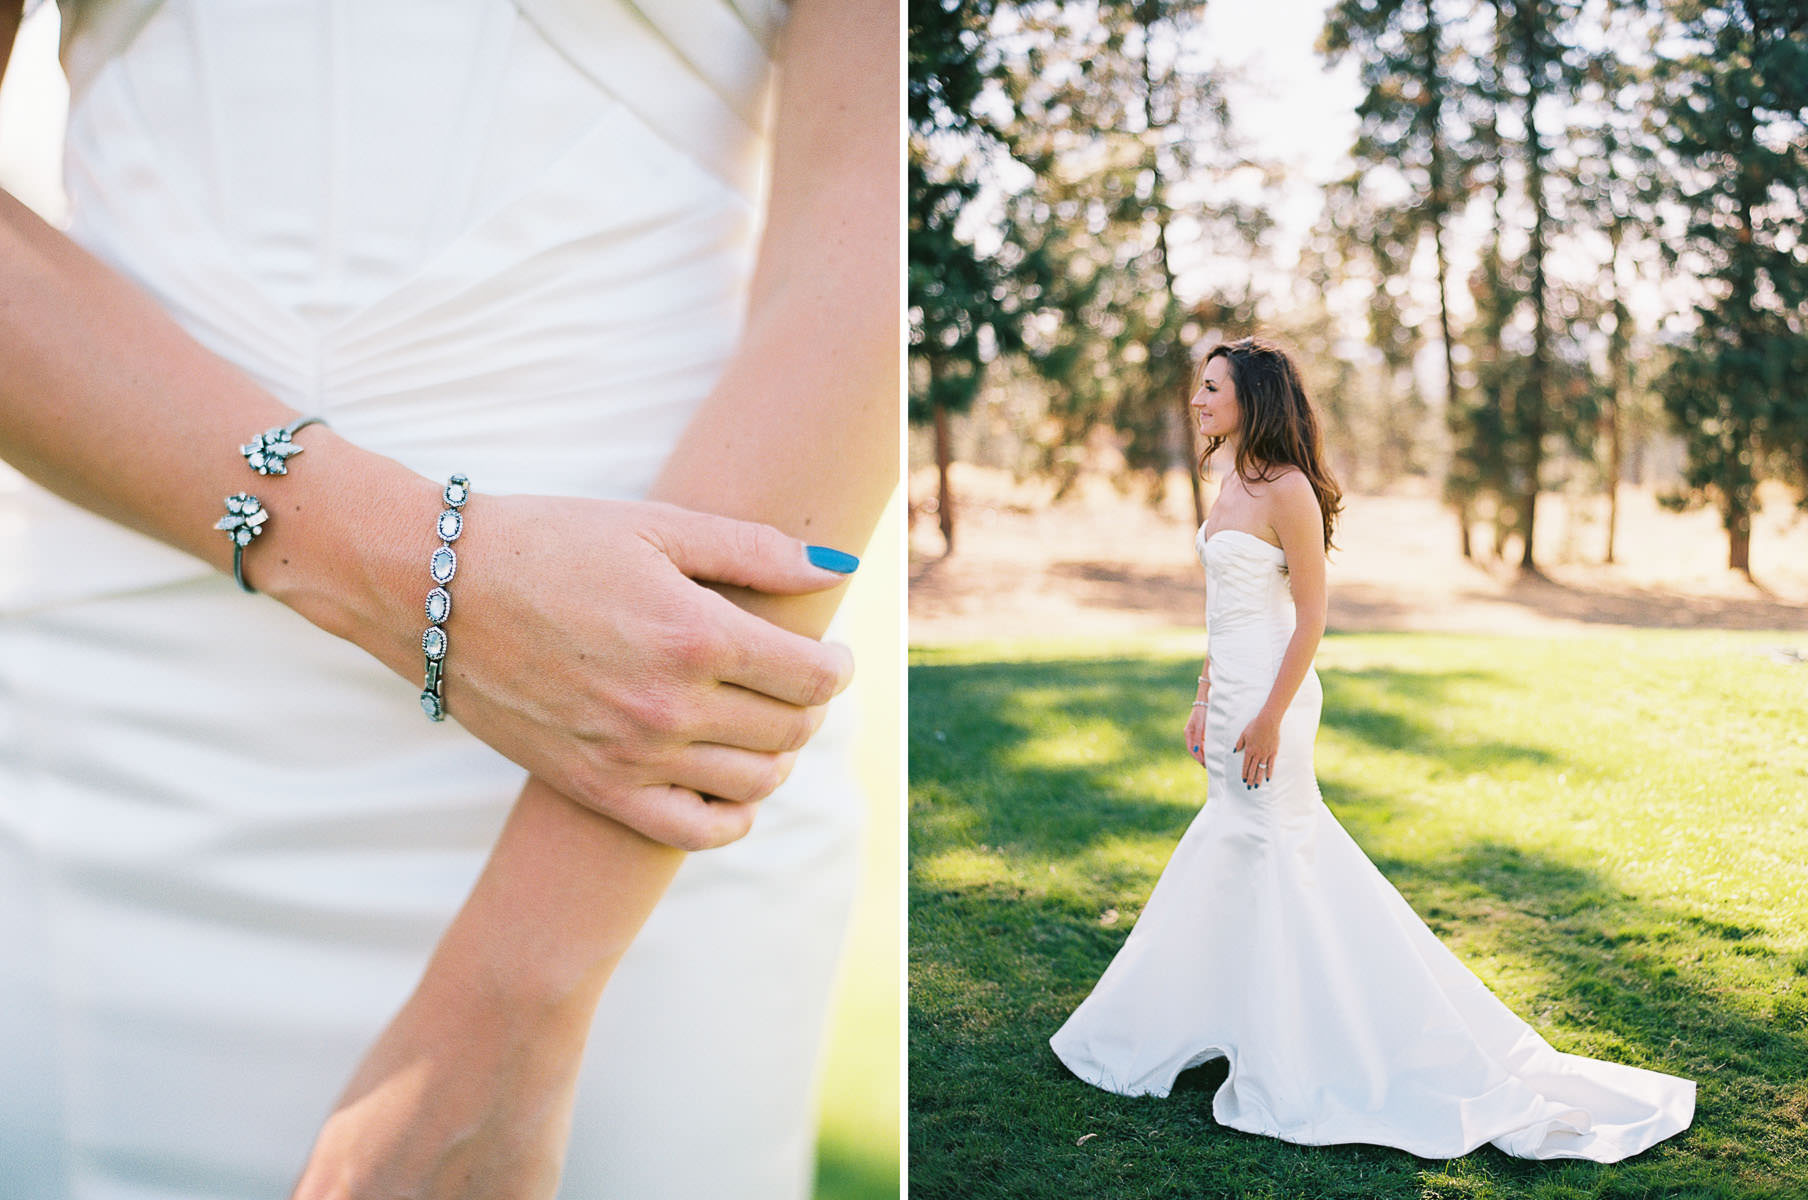 Bridal portraits at an elegant Beacon Hill Events Wedding captured by top Spokane Wedding Photographer Anna Peters